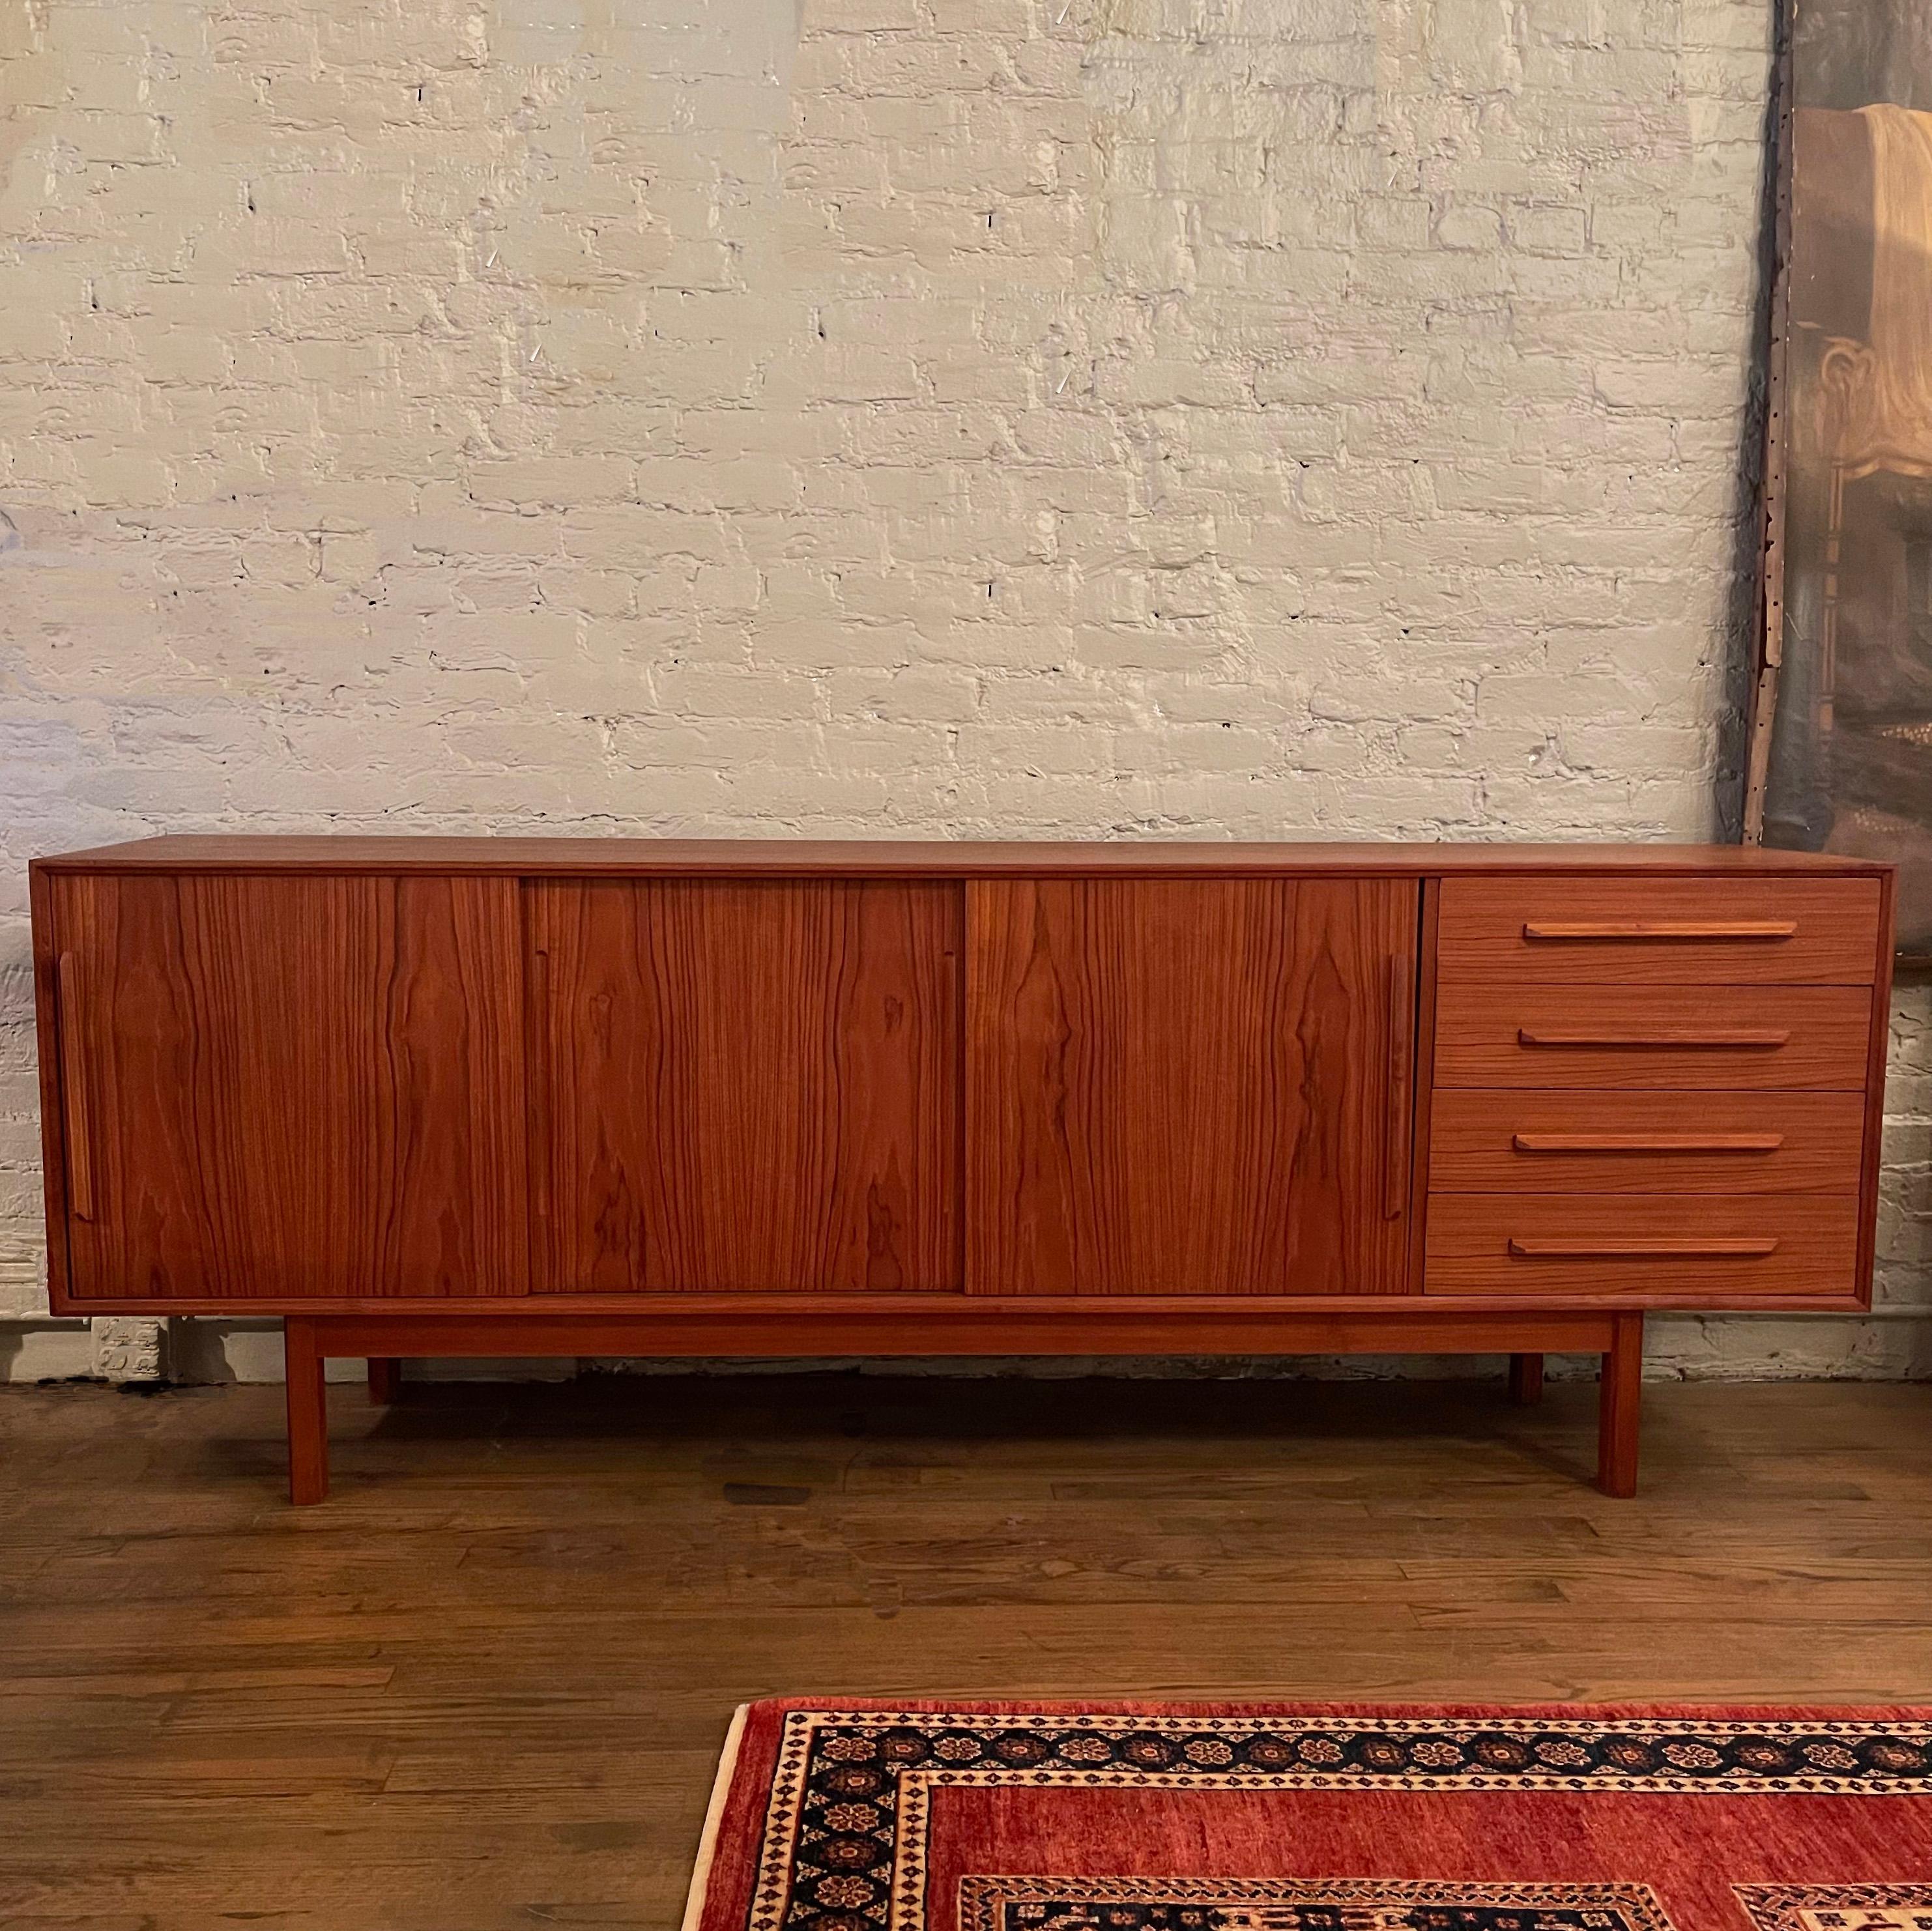 Handsome, streamlined, Scandinavinian modern, teak credenza, sideboard by Dyrlund features sliding doors with interior shelves and hidden drawers and a bank of exterior drawers.